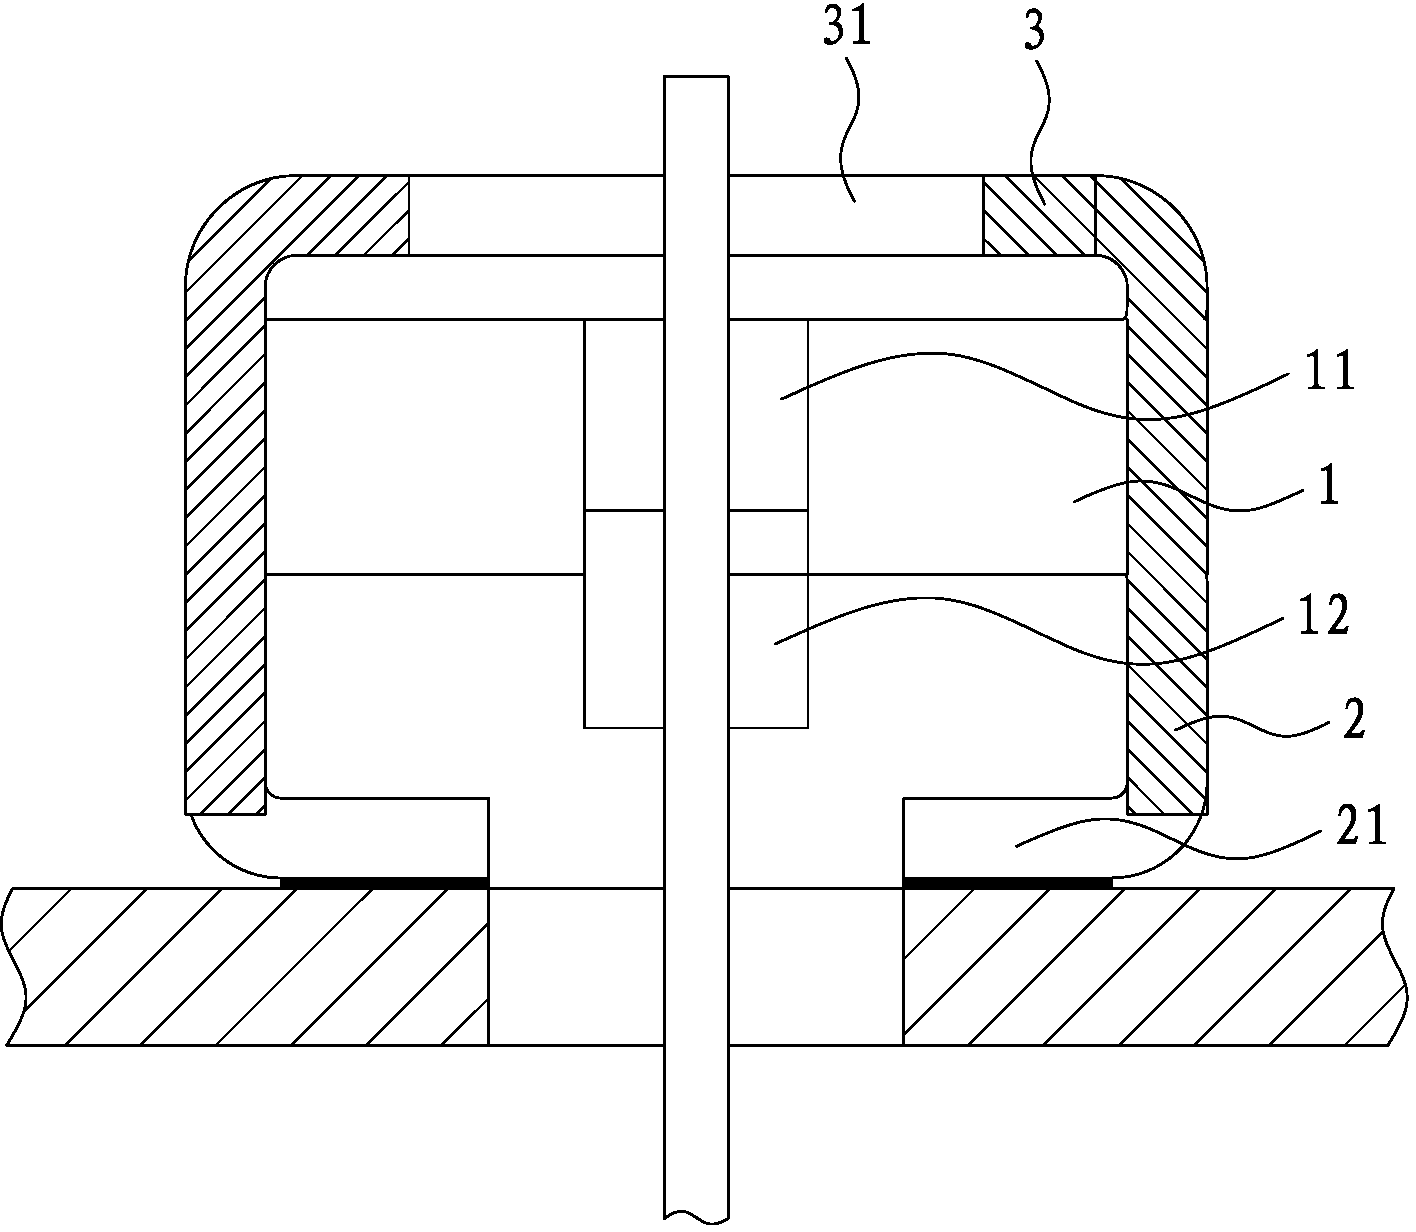 Light-emitting diode (LED) lamp light source board connector, driving board connecting pin and LED lamp